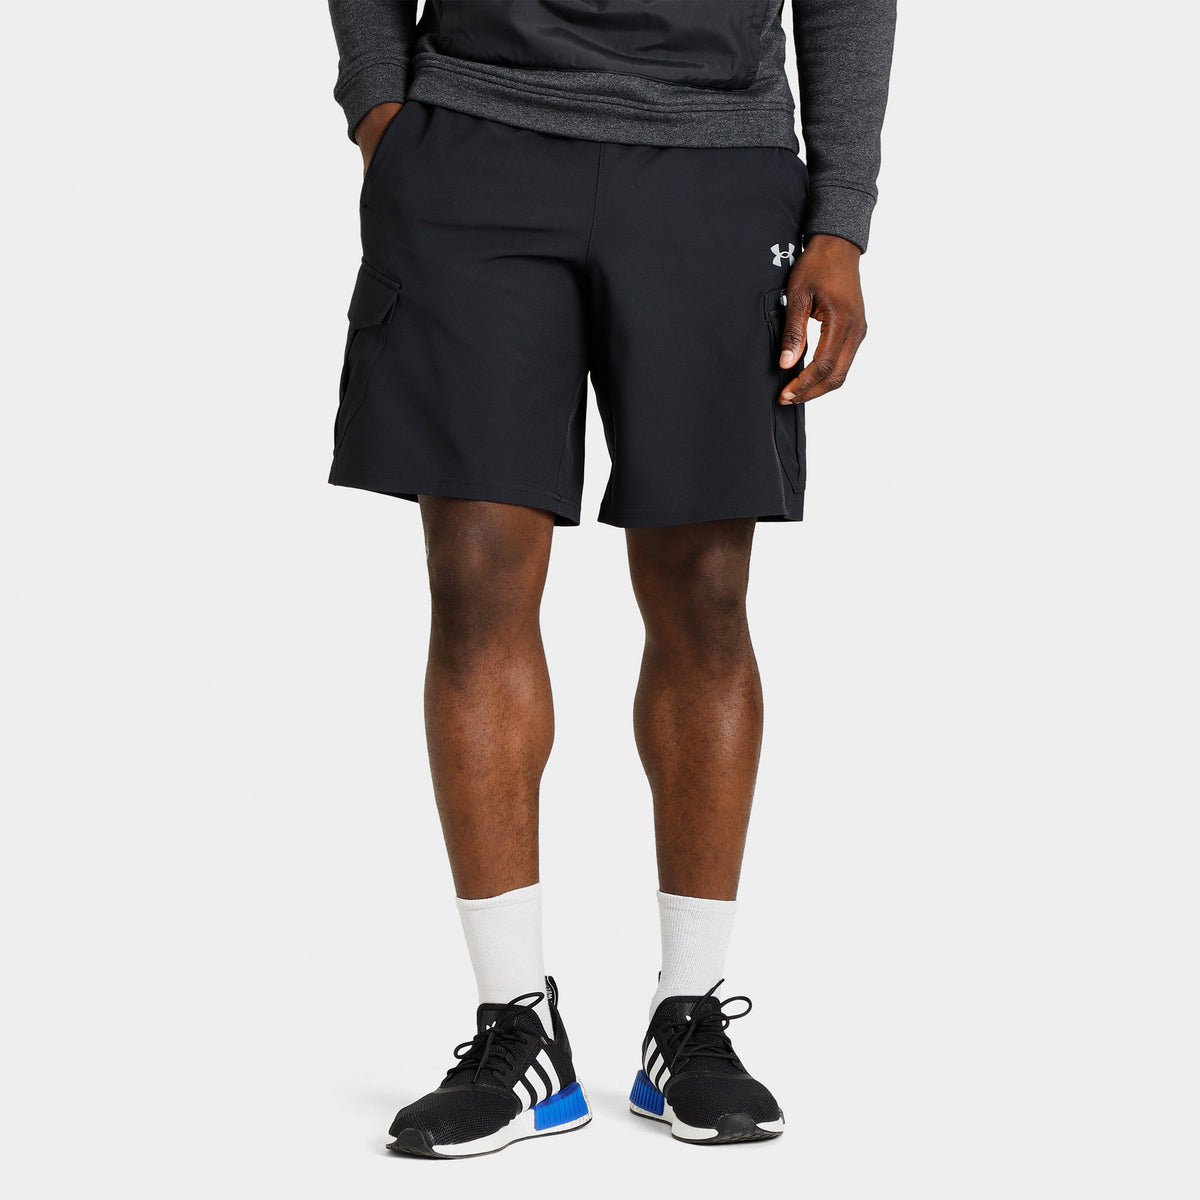 Under Armour Mantra Cargo Shorts, Black/Pitch Gray, 30